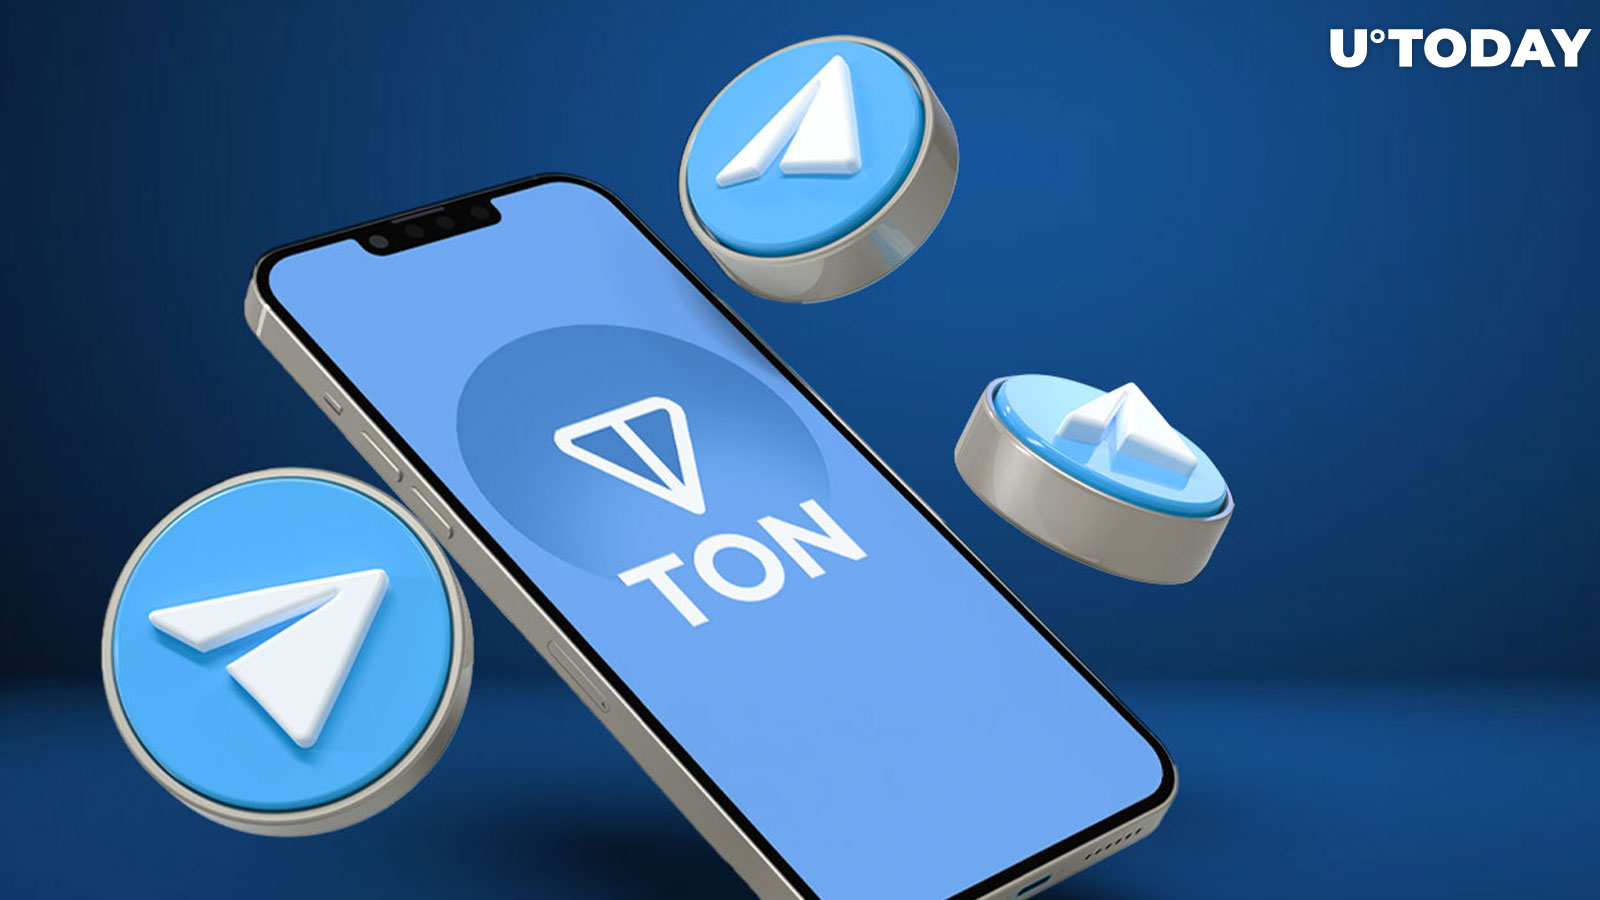 Toncoin: Telegram's Crypto Project Overview